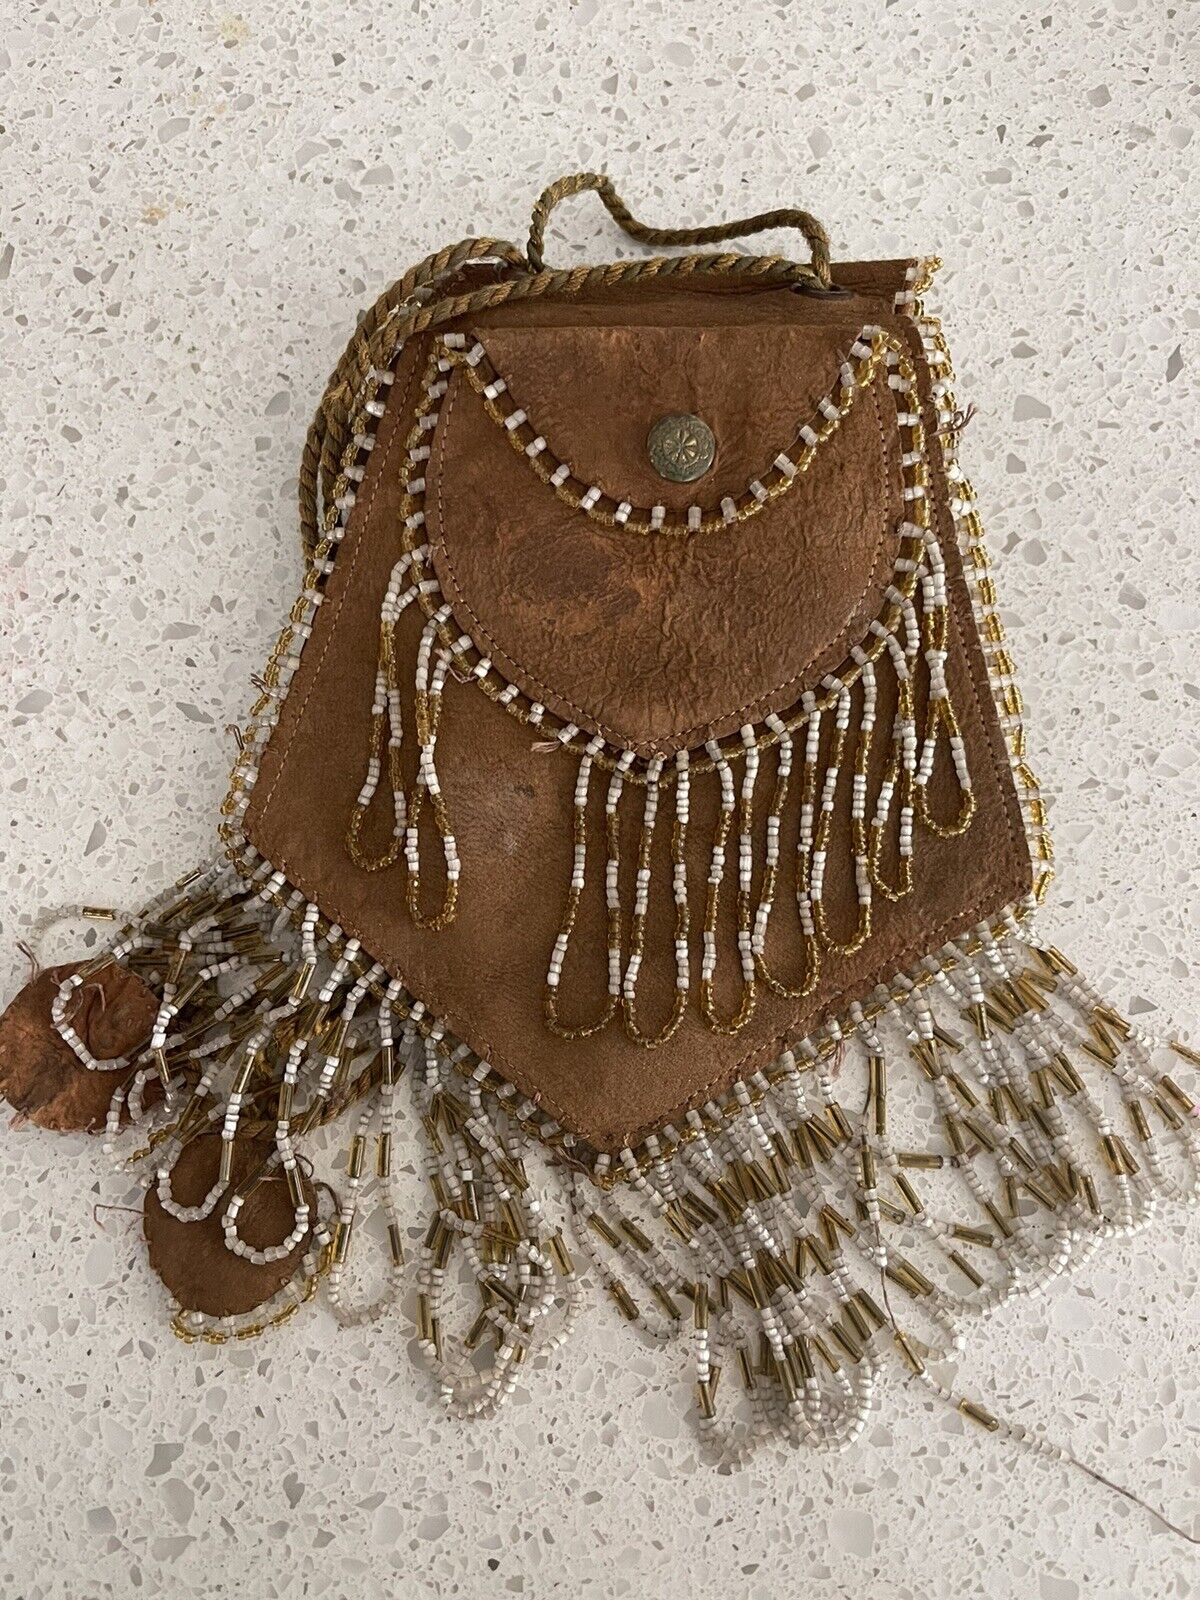 Antique As Is Beaded Medicine Bag Pouch Native American Iroquoi Buffalo Hide